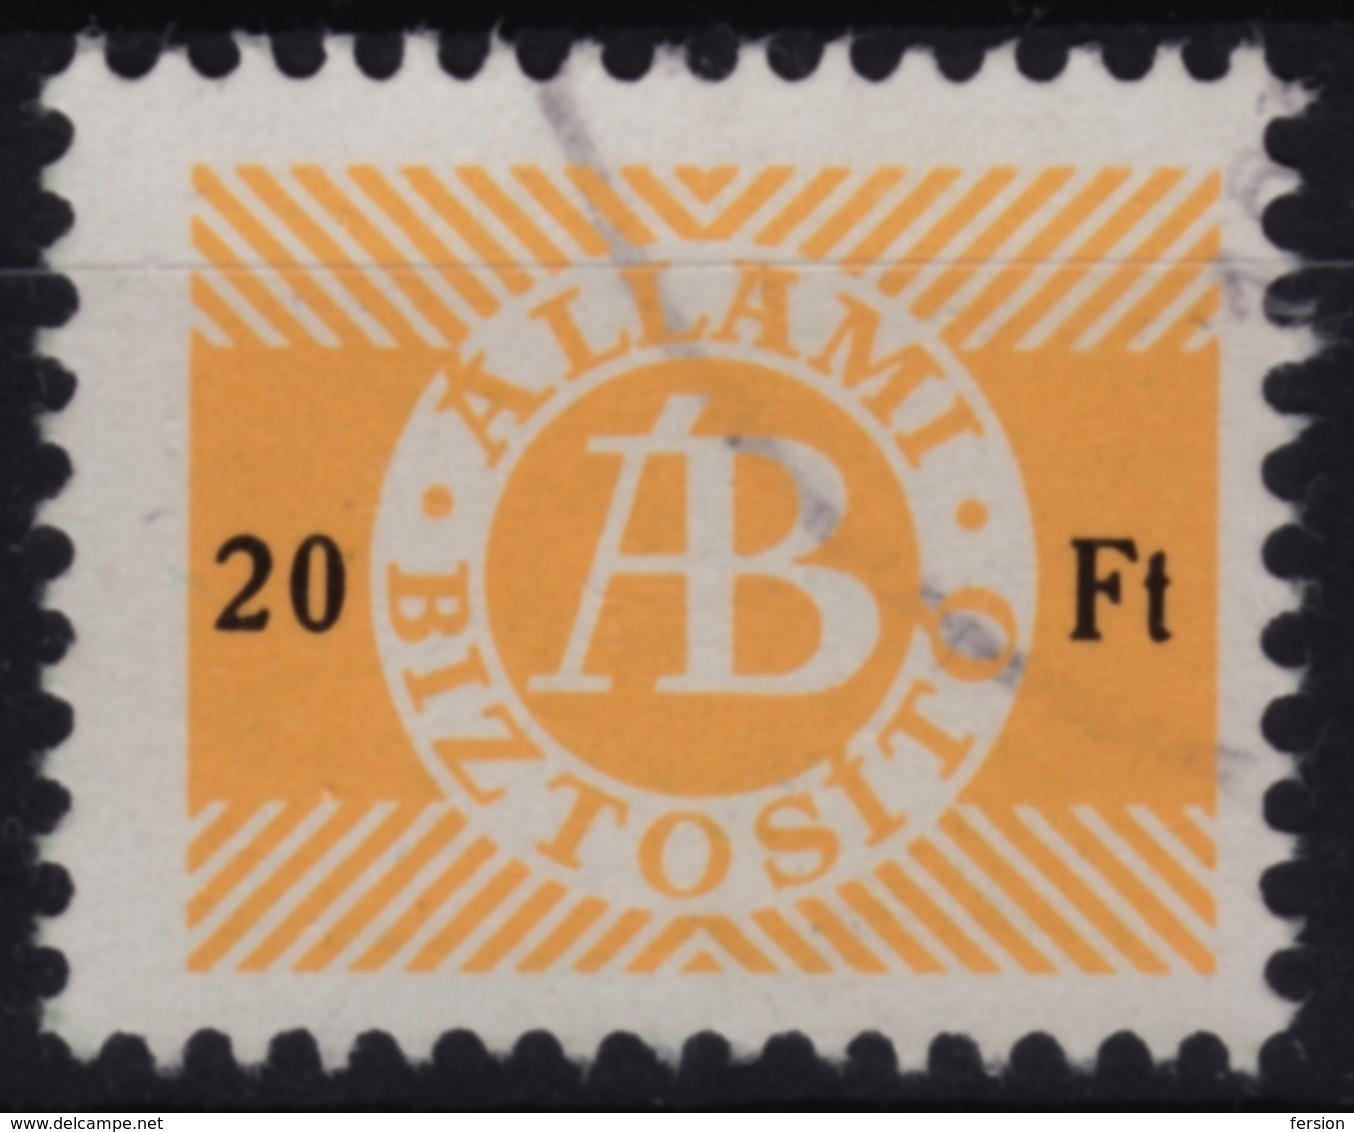 1980's Hungary - Travel / Baggage Insurance Stamp REVENUE Stamp - Used - 20 Ft - Revenue Stamps